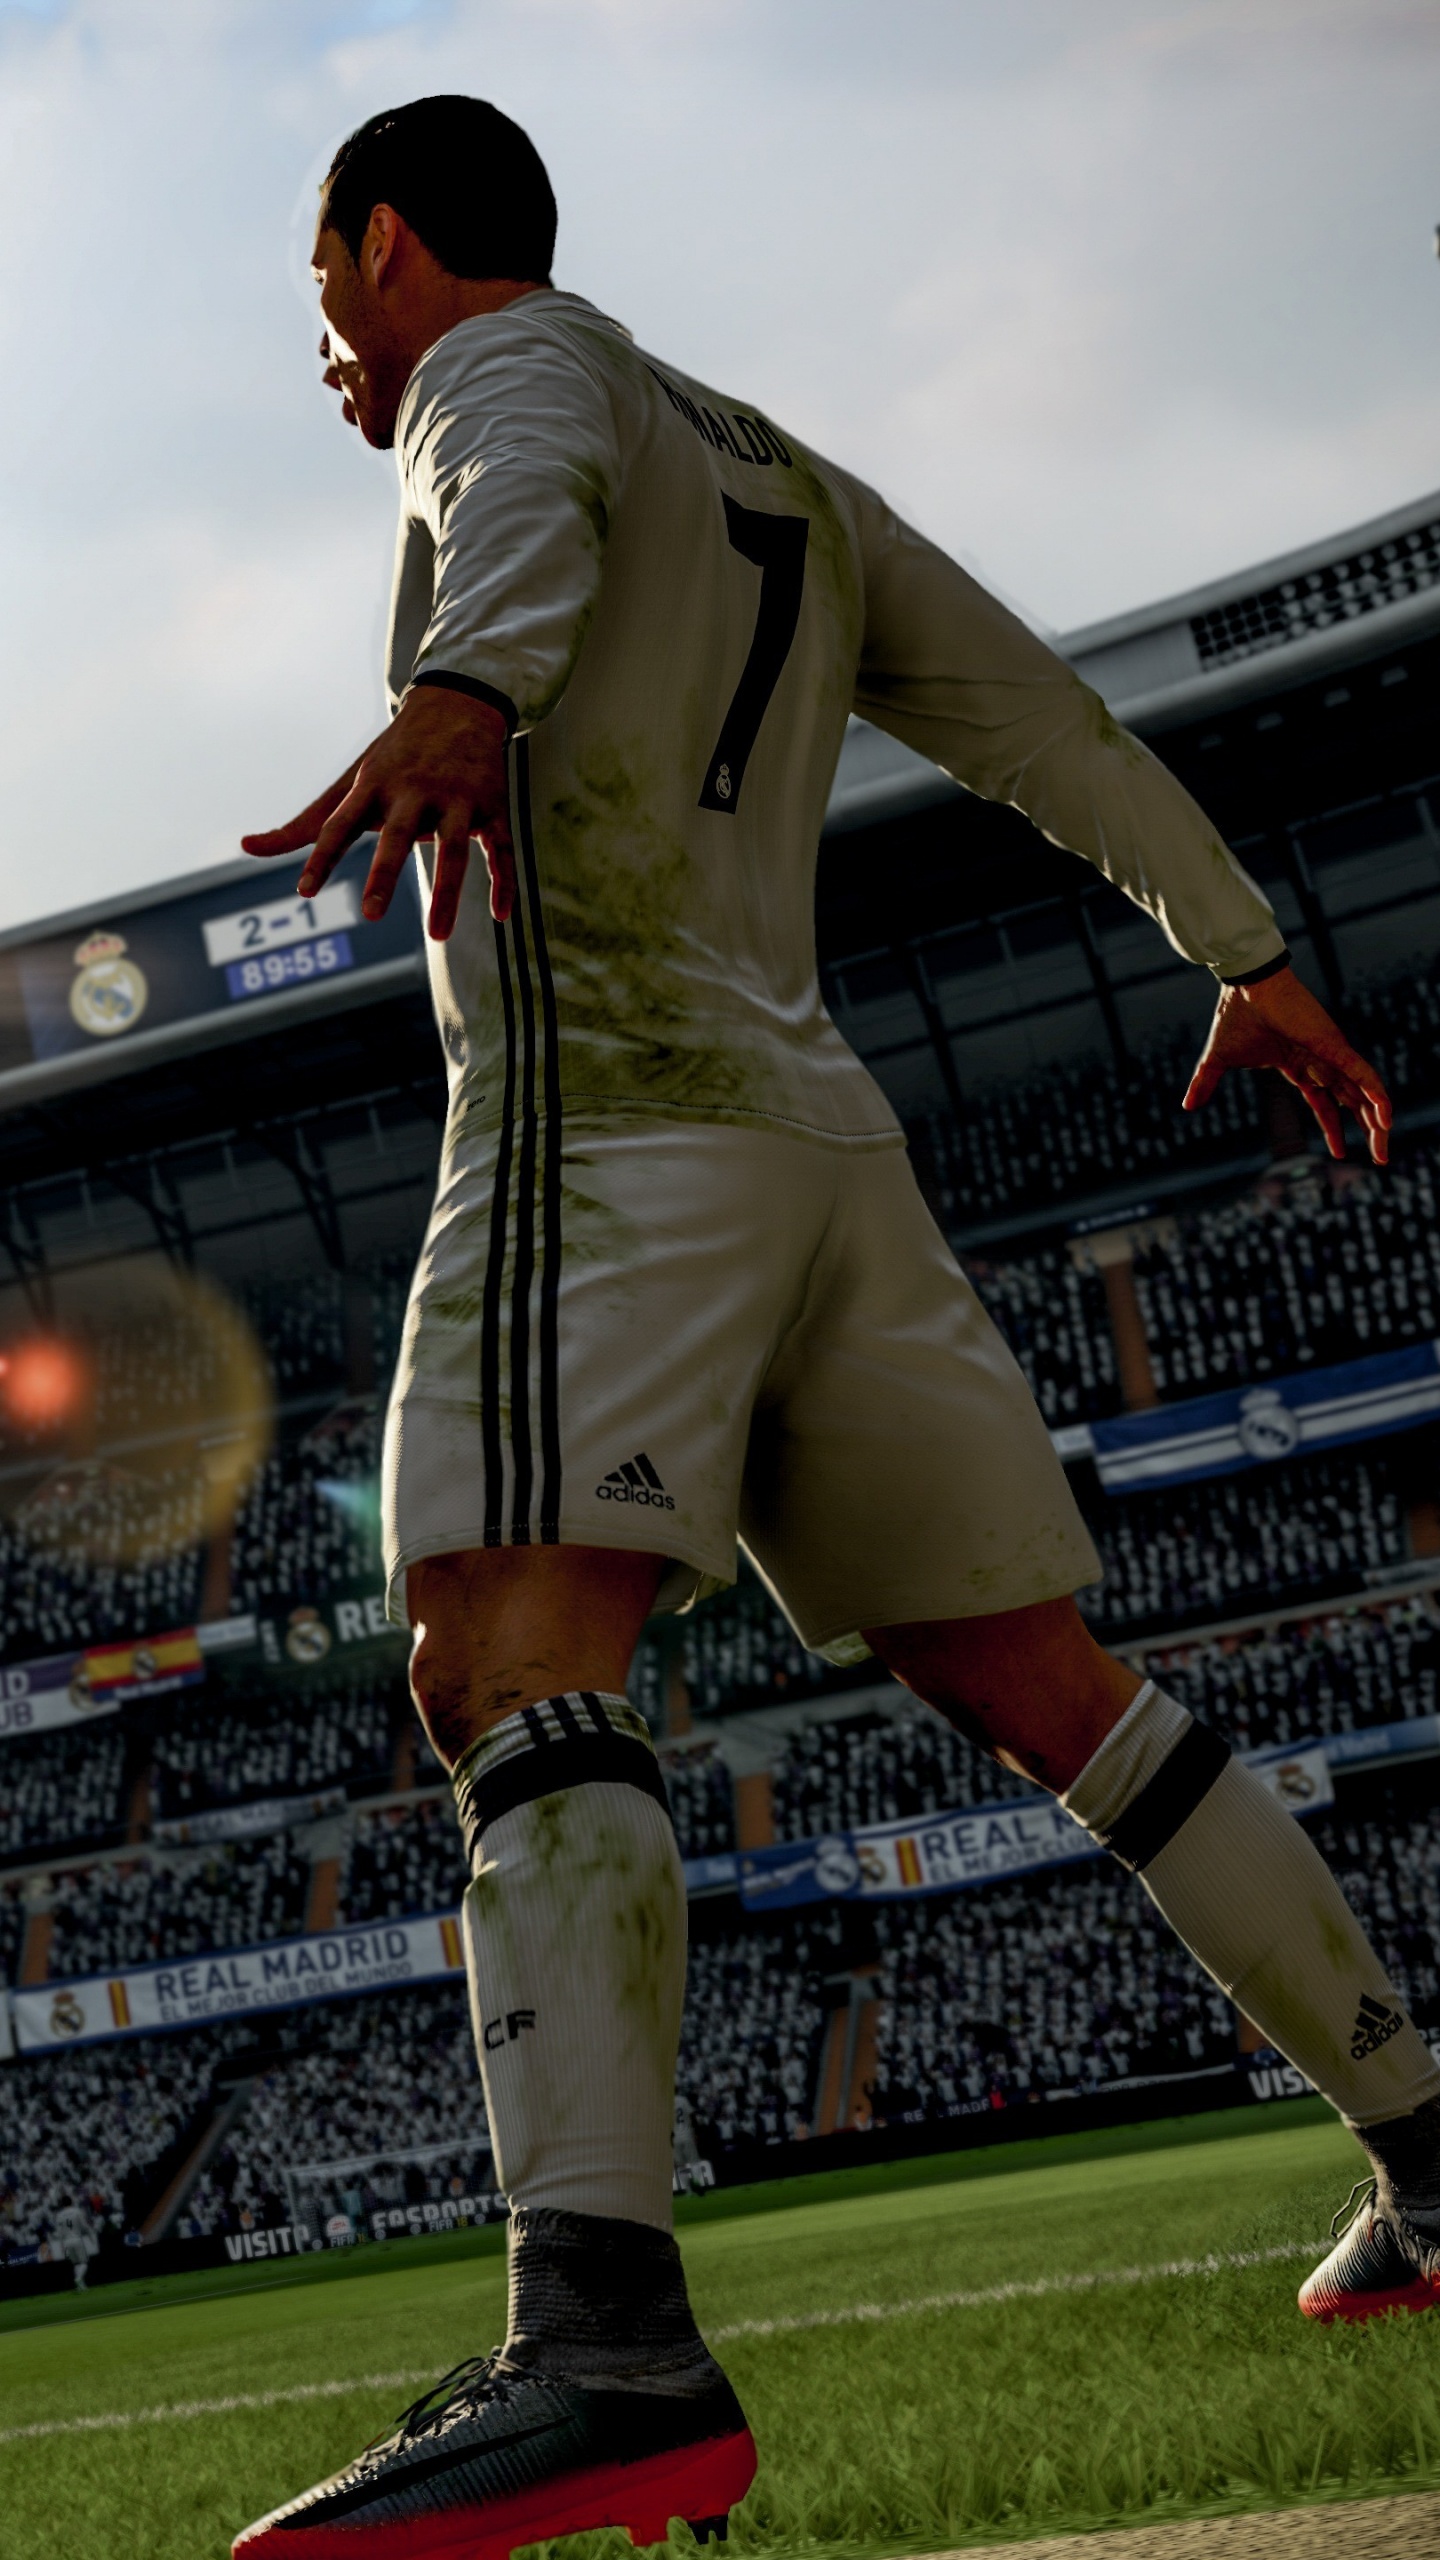 FIFA 18, ea Sports, Electronic Arts, Sports Venue, Stadion. Wallpaper in 1440x2560 Resolution